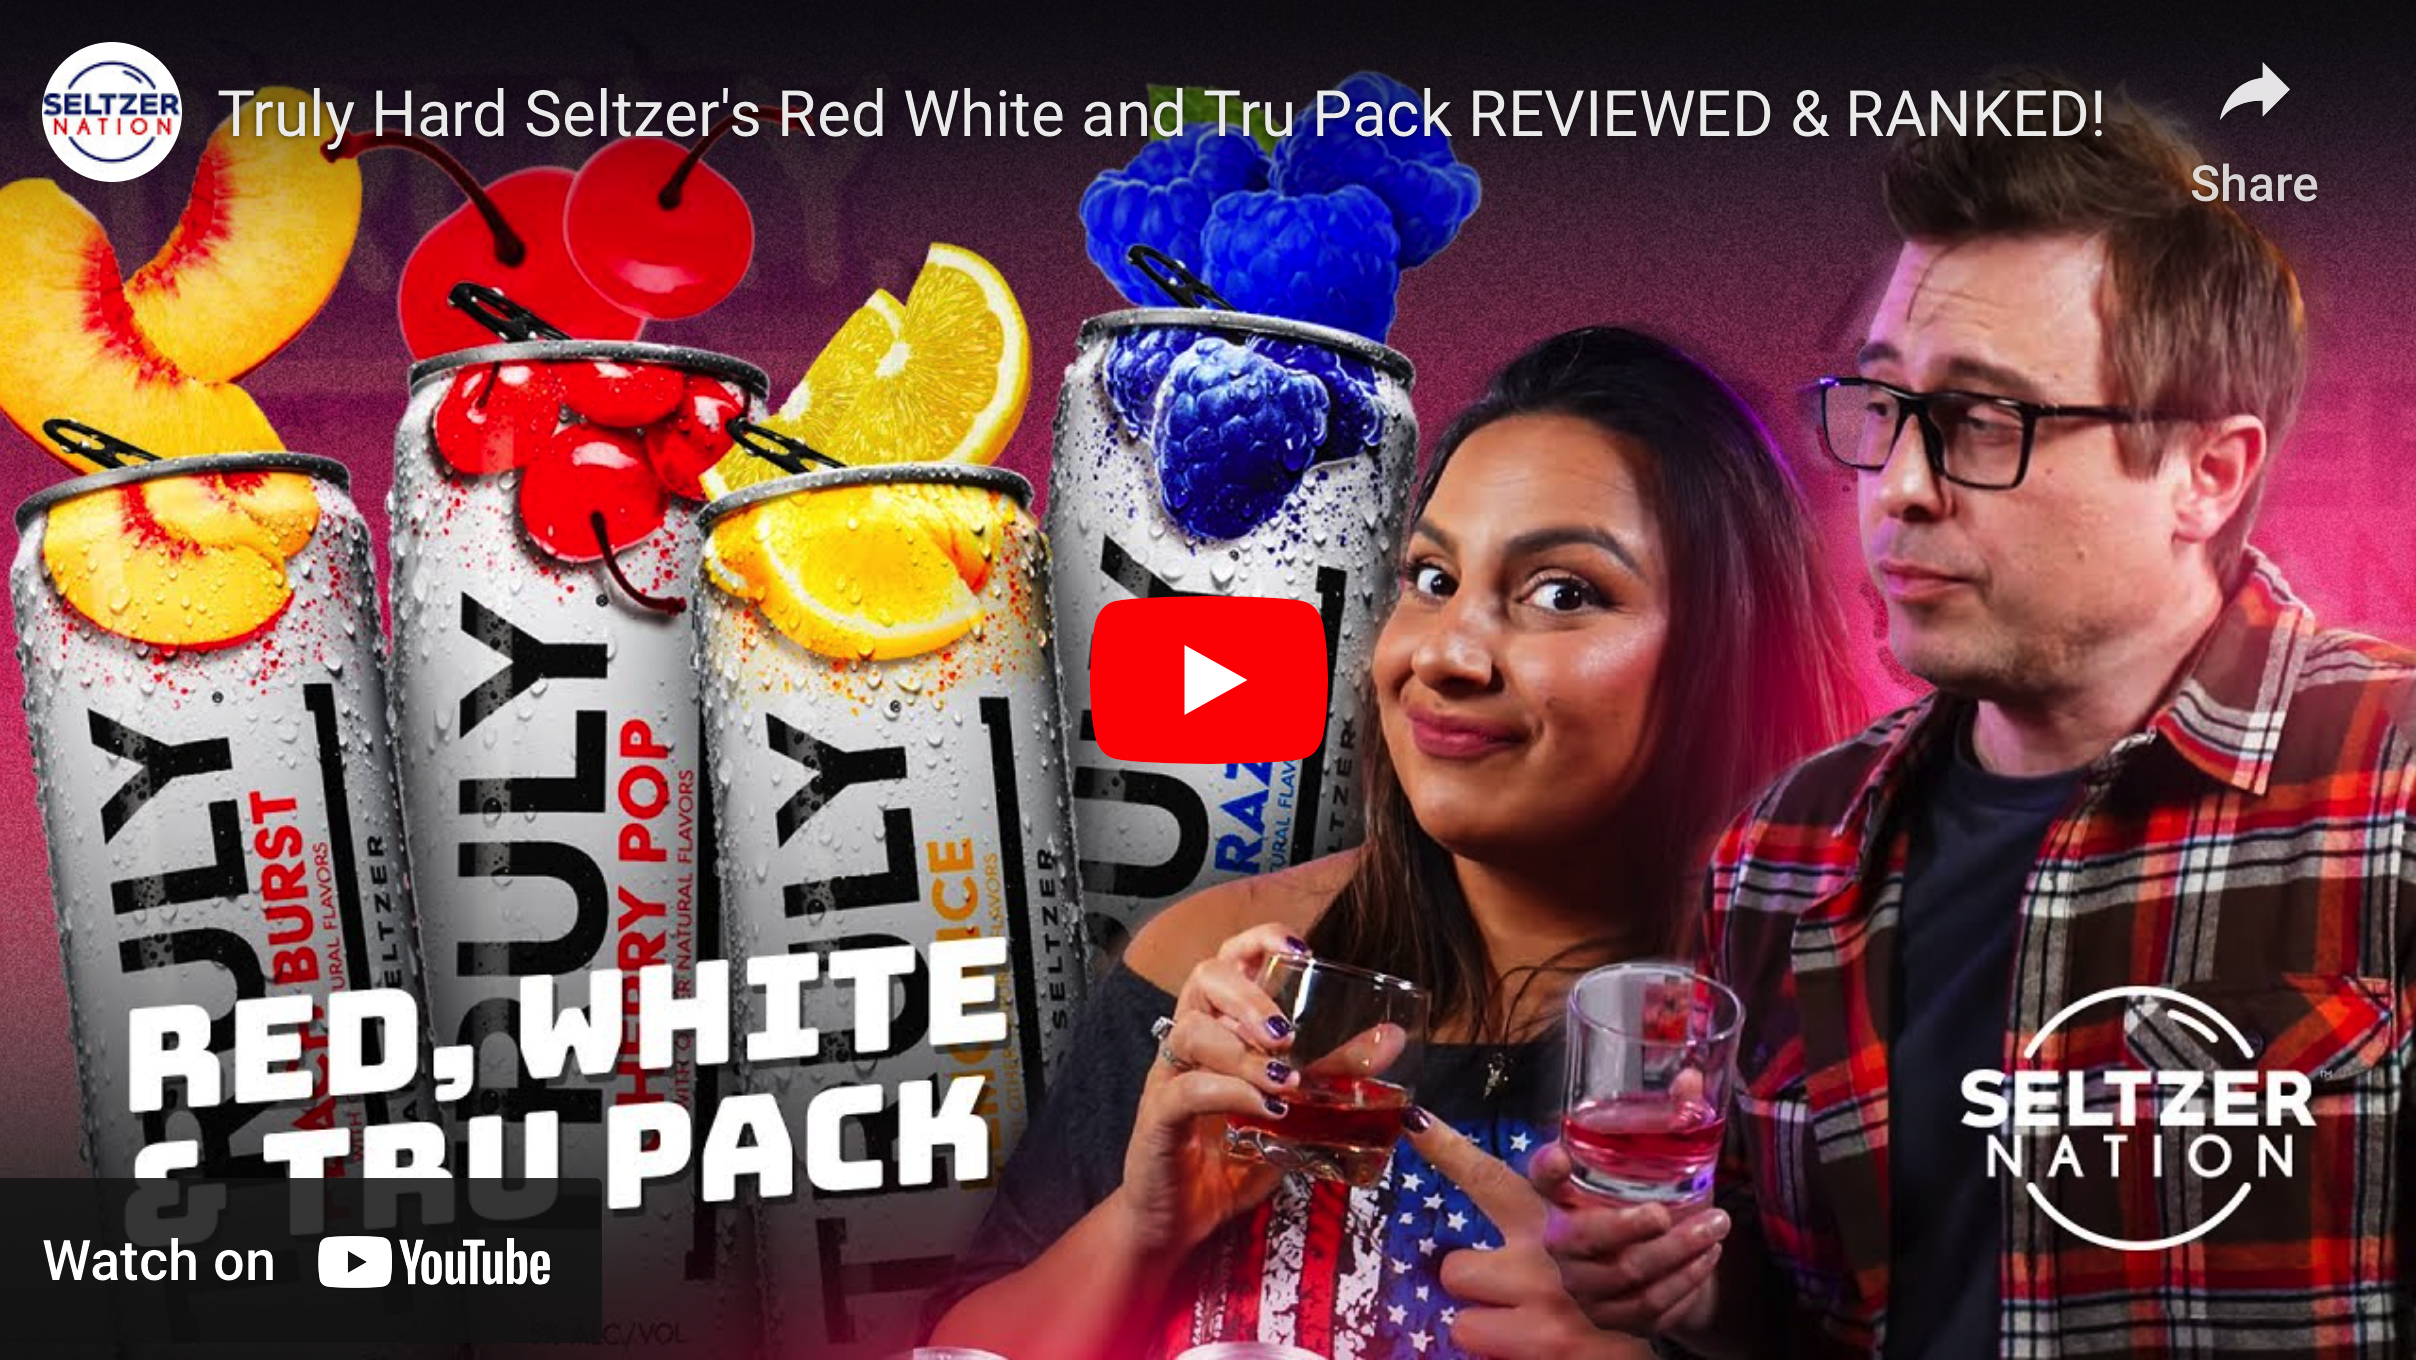 Truly Hard Seltzer's Red White and Tru Pack REVIEWED & RANKED!